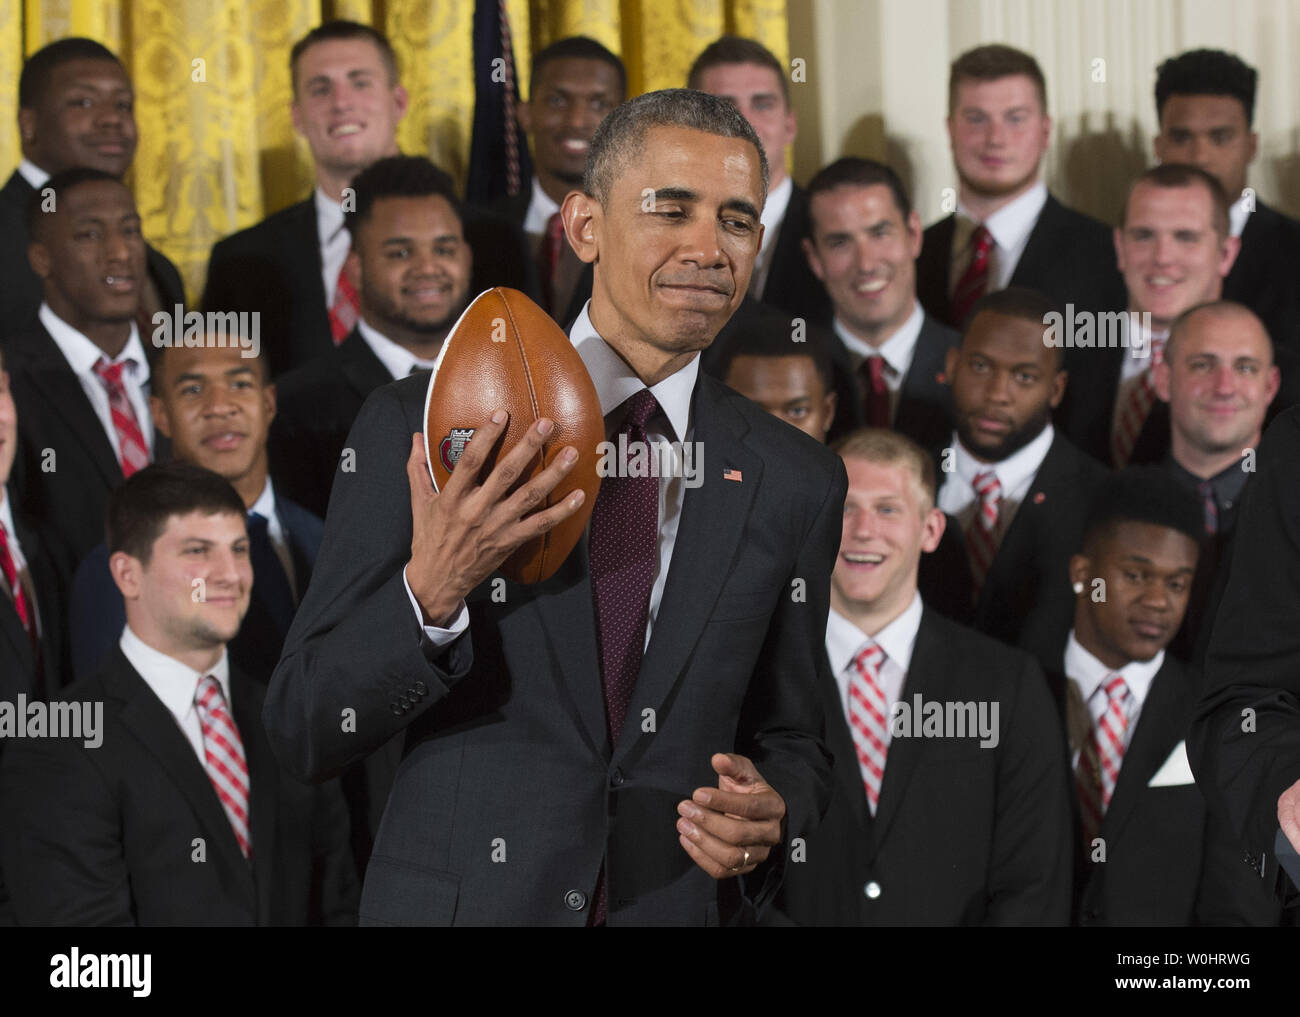 President Barack Obama holds a football as he honors the 2015 College Football Playoff National Champions Ohio State University Buckeyes in the East Room at the White House in Washington, D.C. on April 20, 2015.  Photo by Kevin Dietsch/UPI Stock Photo